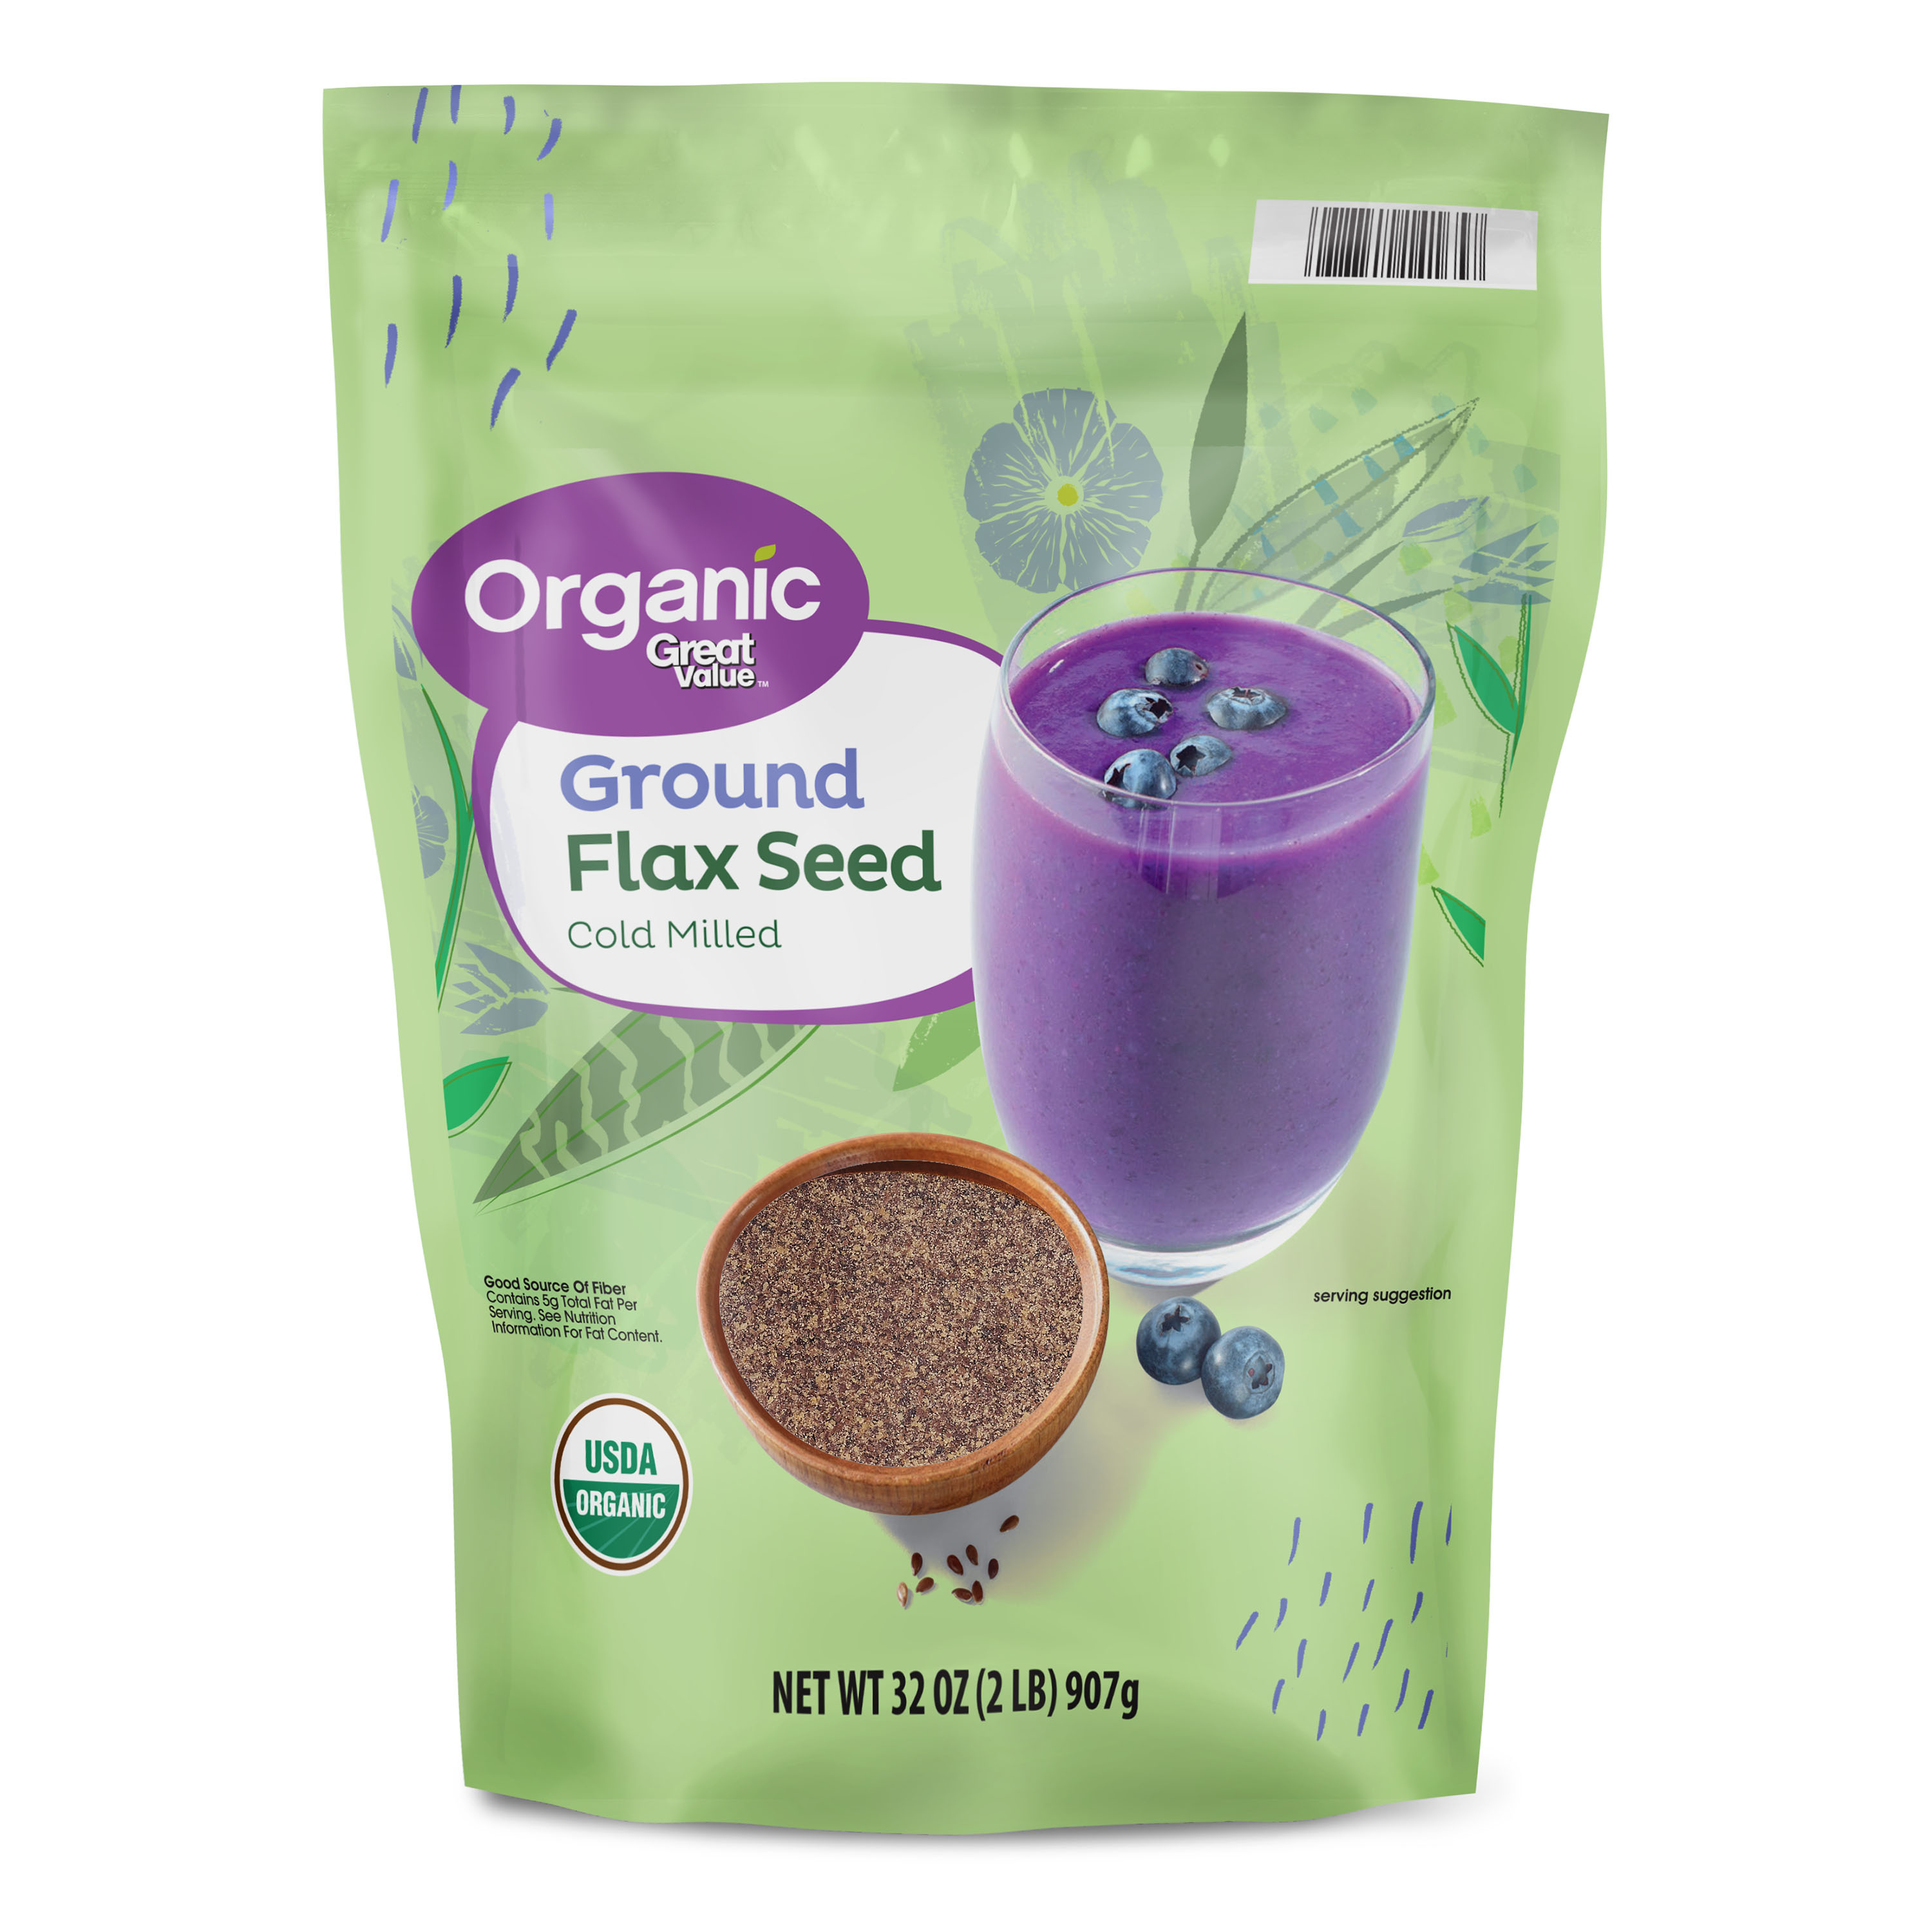 Great Value Organic Ground Flax Seed, 32 oz - image 1 of 7